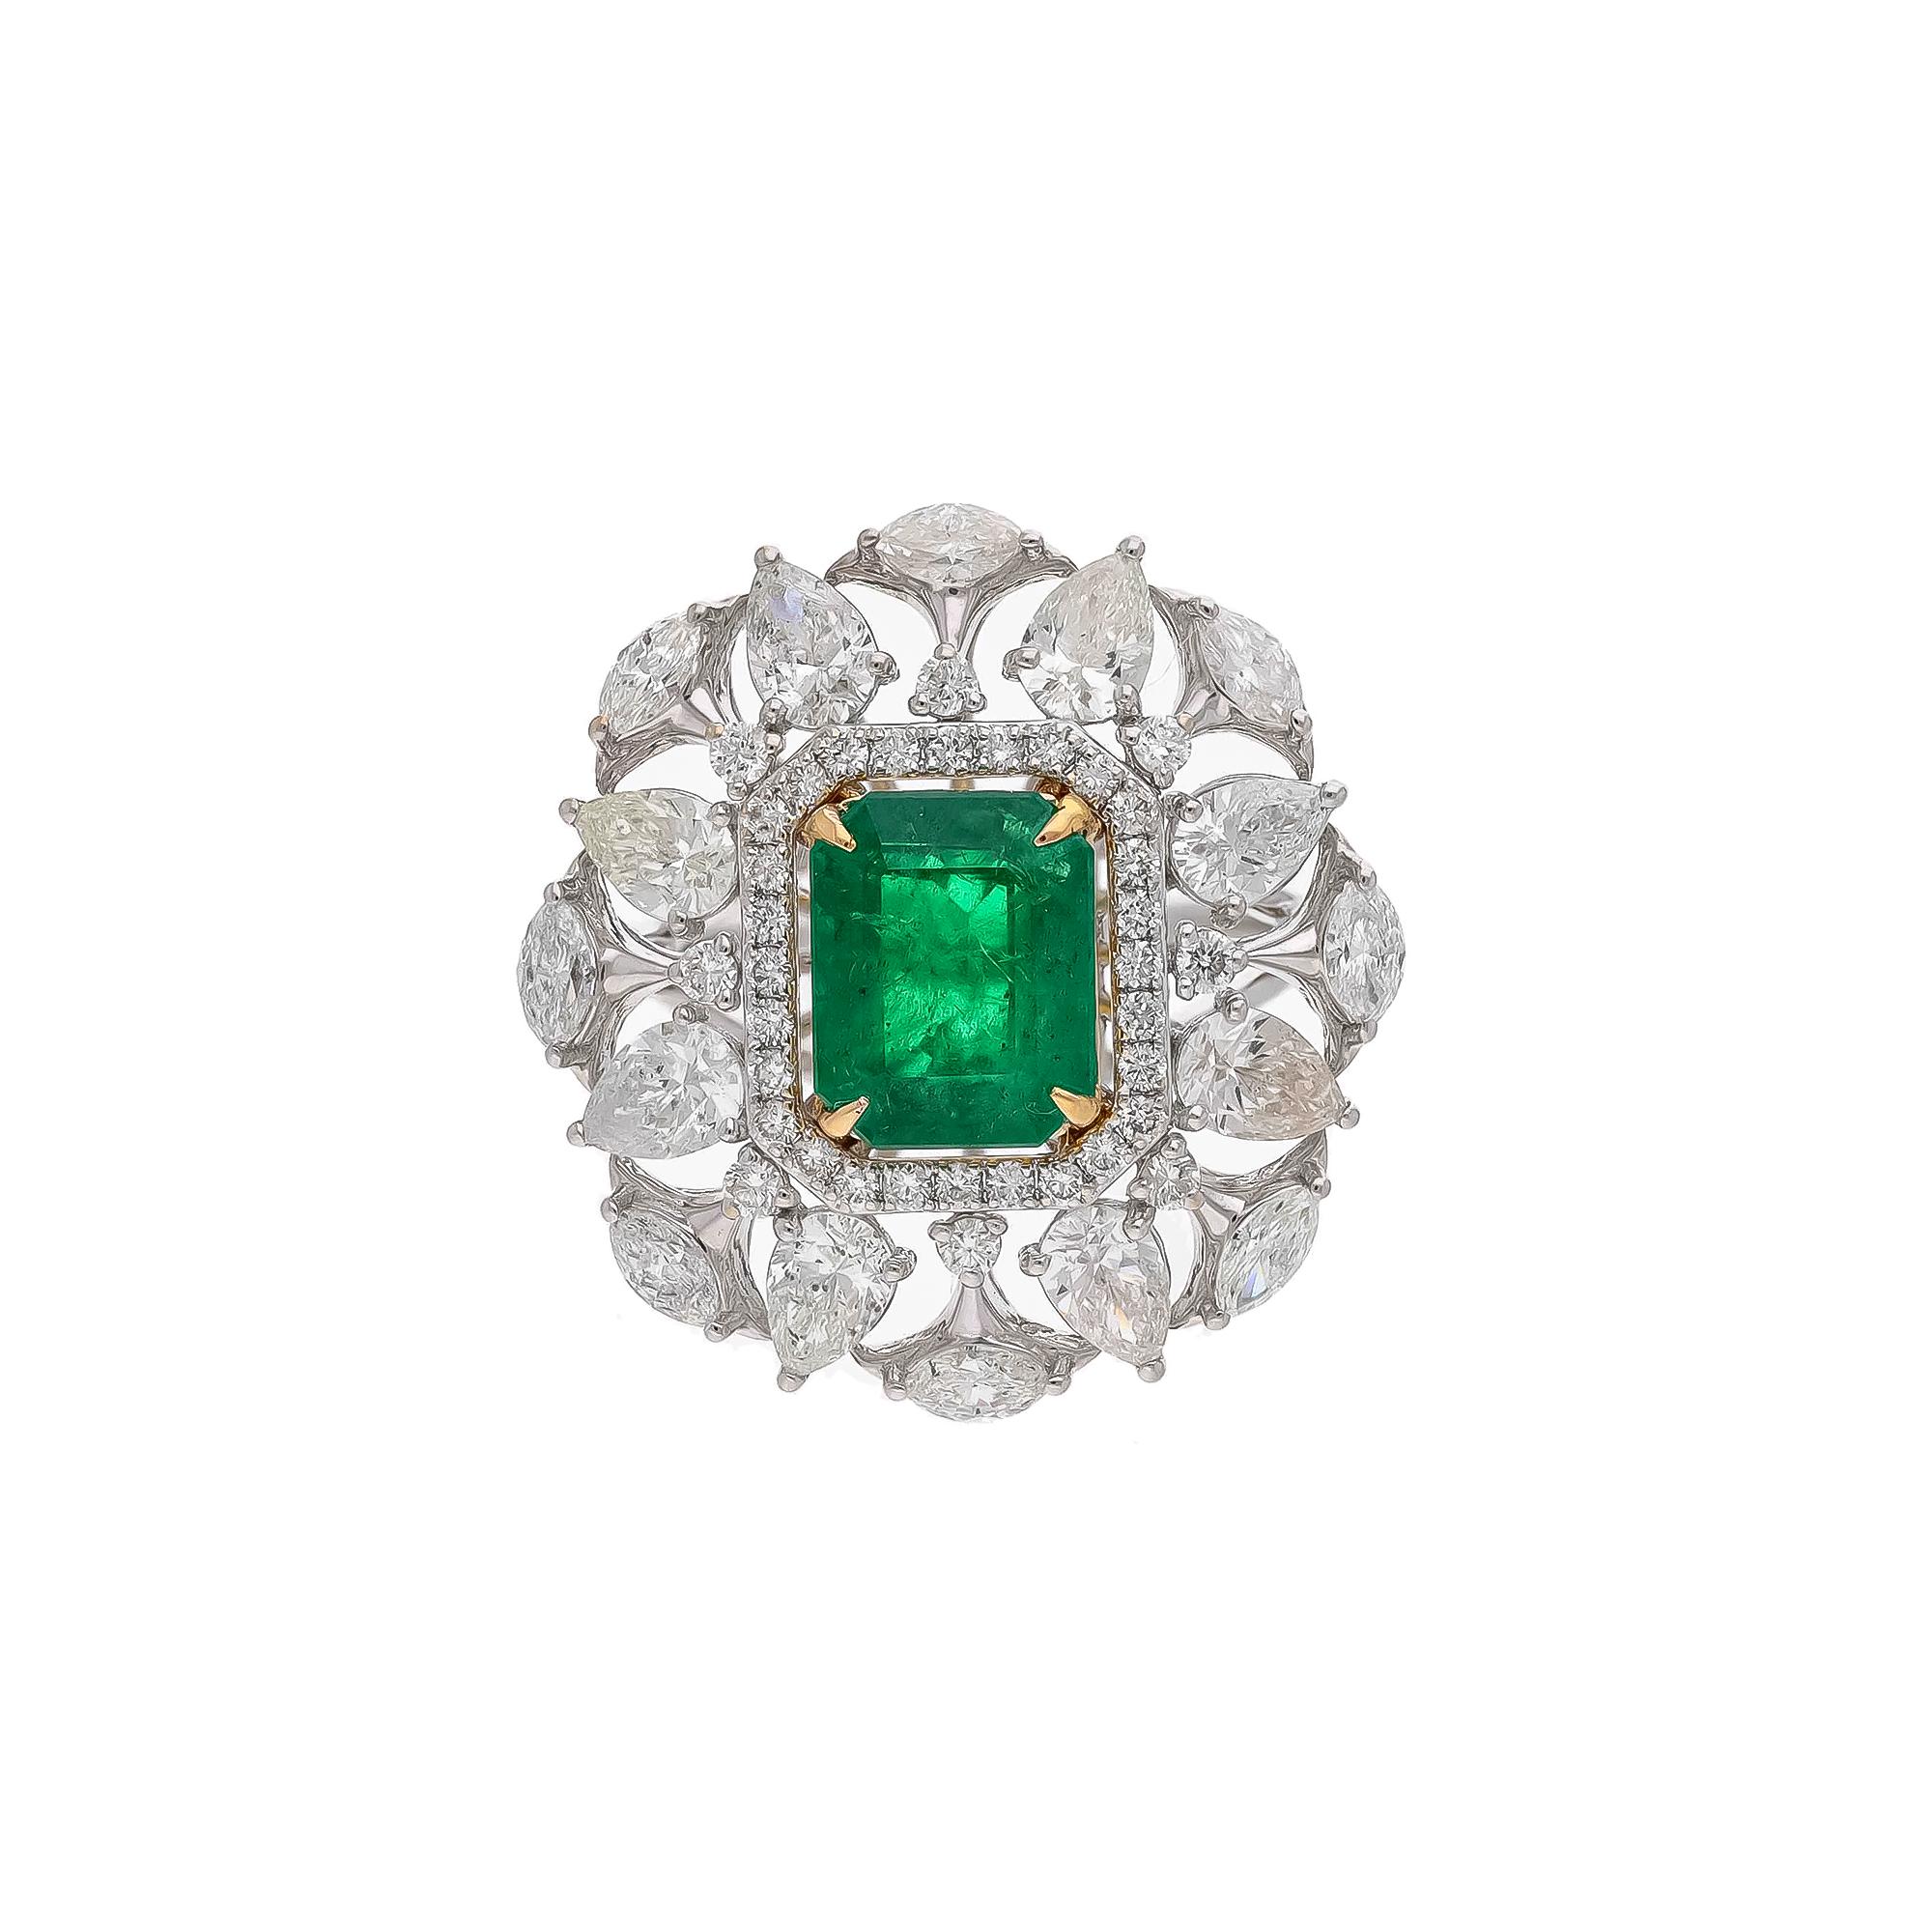 Diamonds : 2.58 carats
Emerald : 2.74carats
Gold : 5.75 gm( 18k)

This is a beautiful natural Columbian ring  with very high quality emeralds and diamonds ( vsi and G colour

Its very hard to capture the true color and luster of the stone, I have